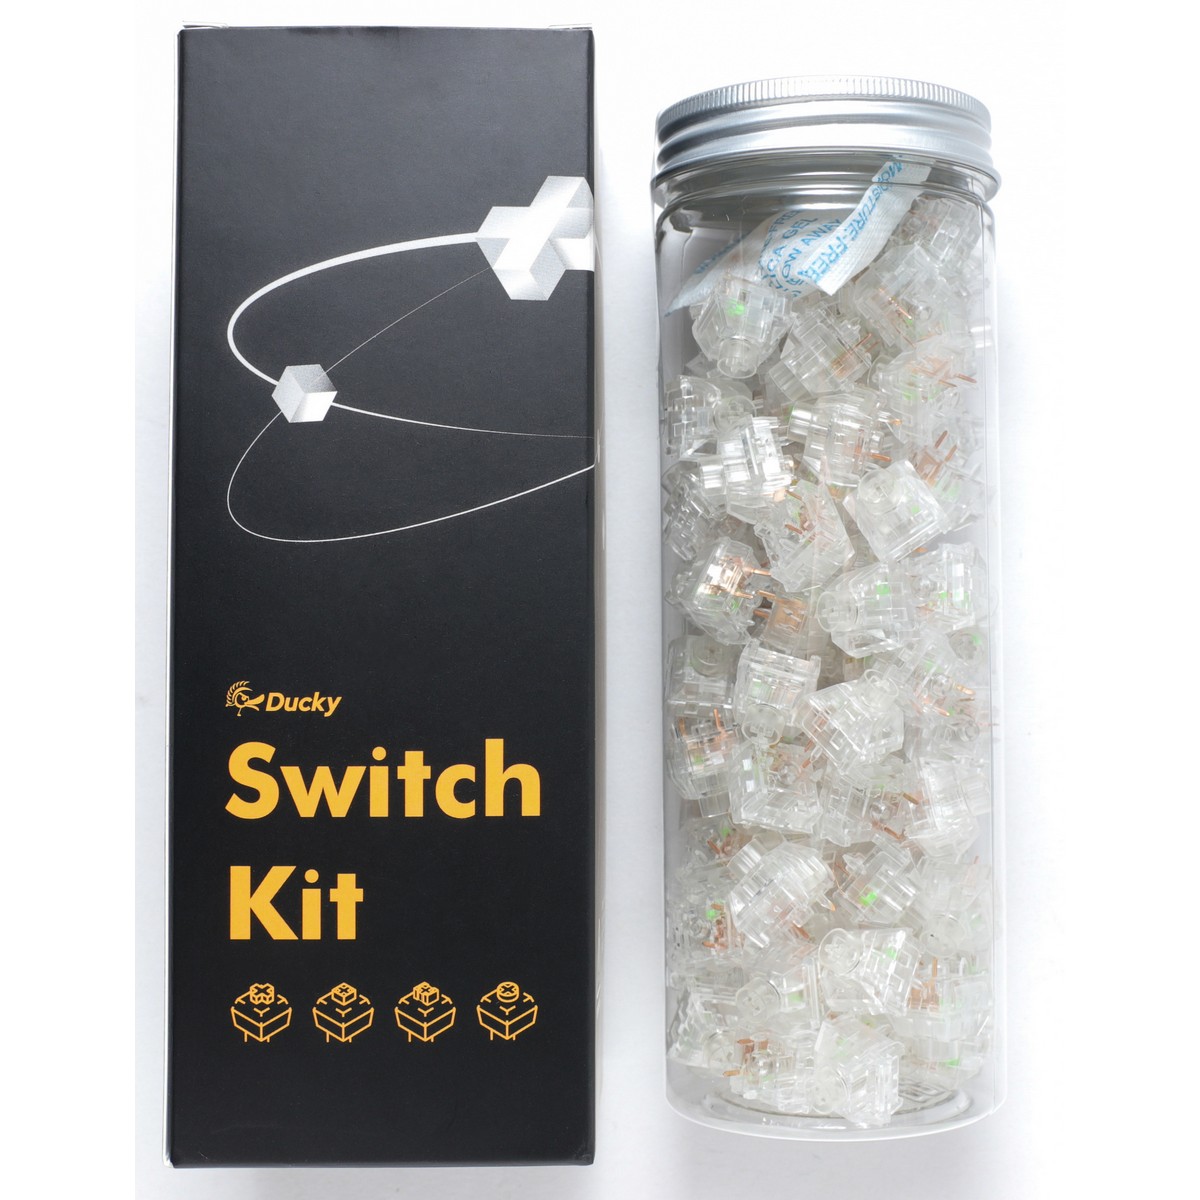 Ducky - Ducky Switch Kit Kailh Box Jellyfish Y 110 Pcs